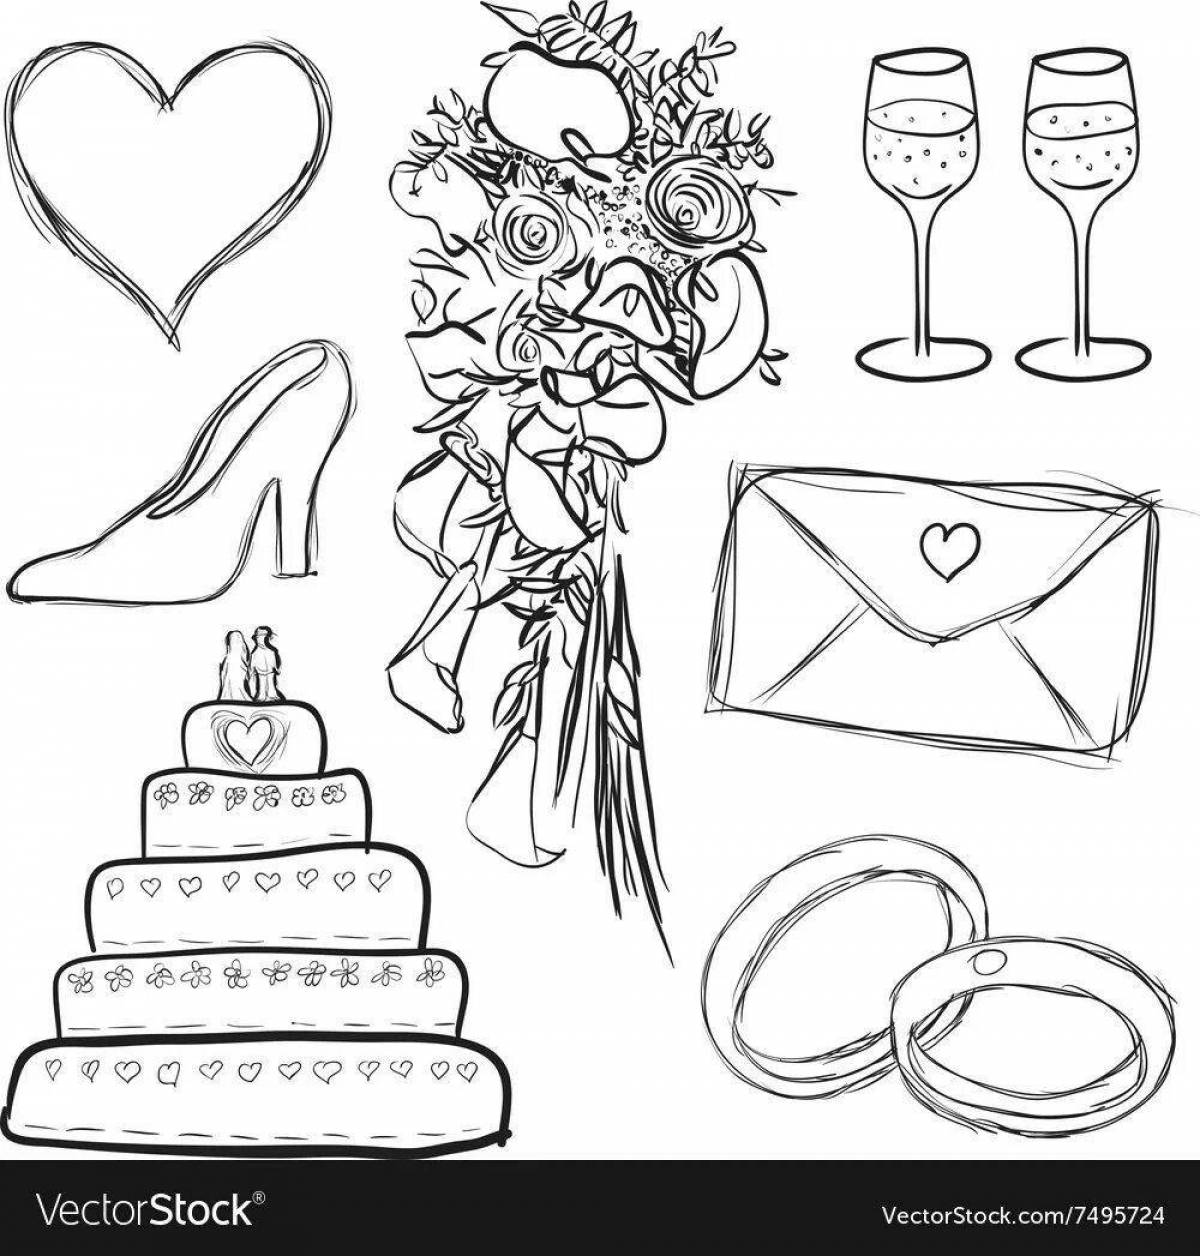 Exalted wedding anniversary coloring book